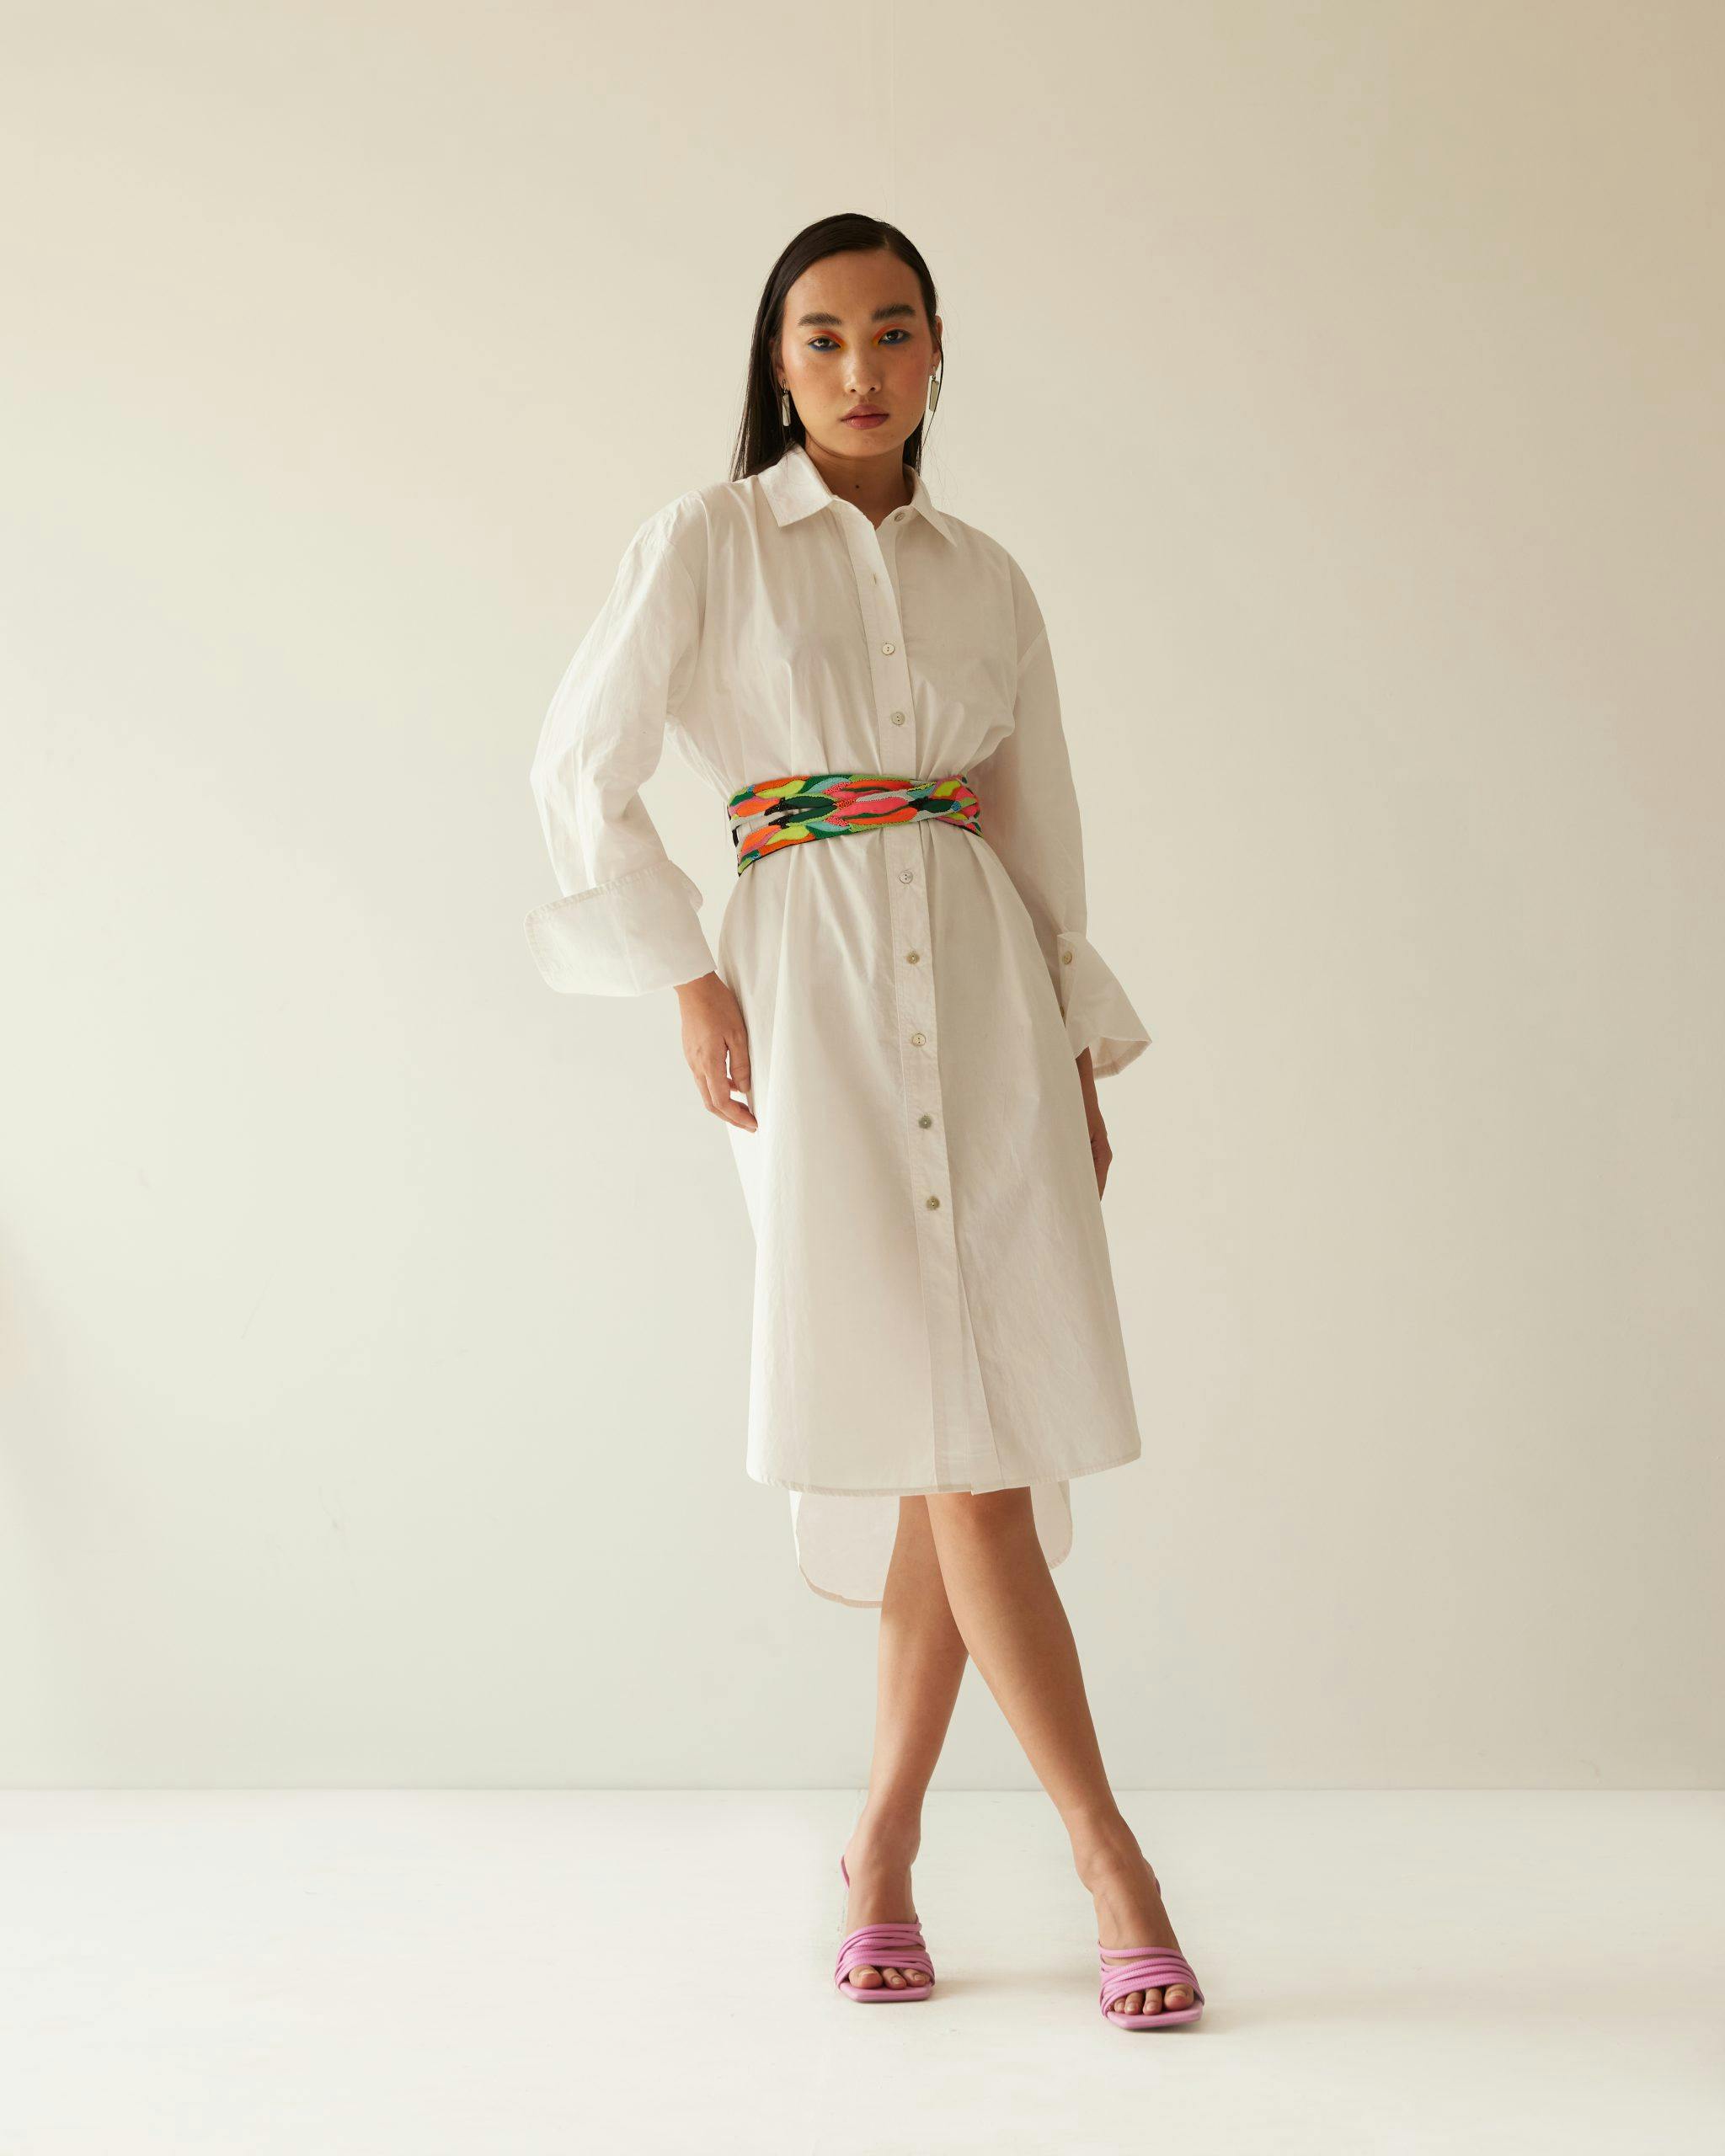 OFF WHITE SHIRT DRESS WITH PAINT STAIN BELT, a product by Mini Sondhi